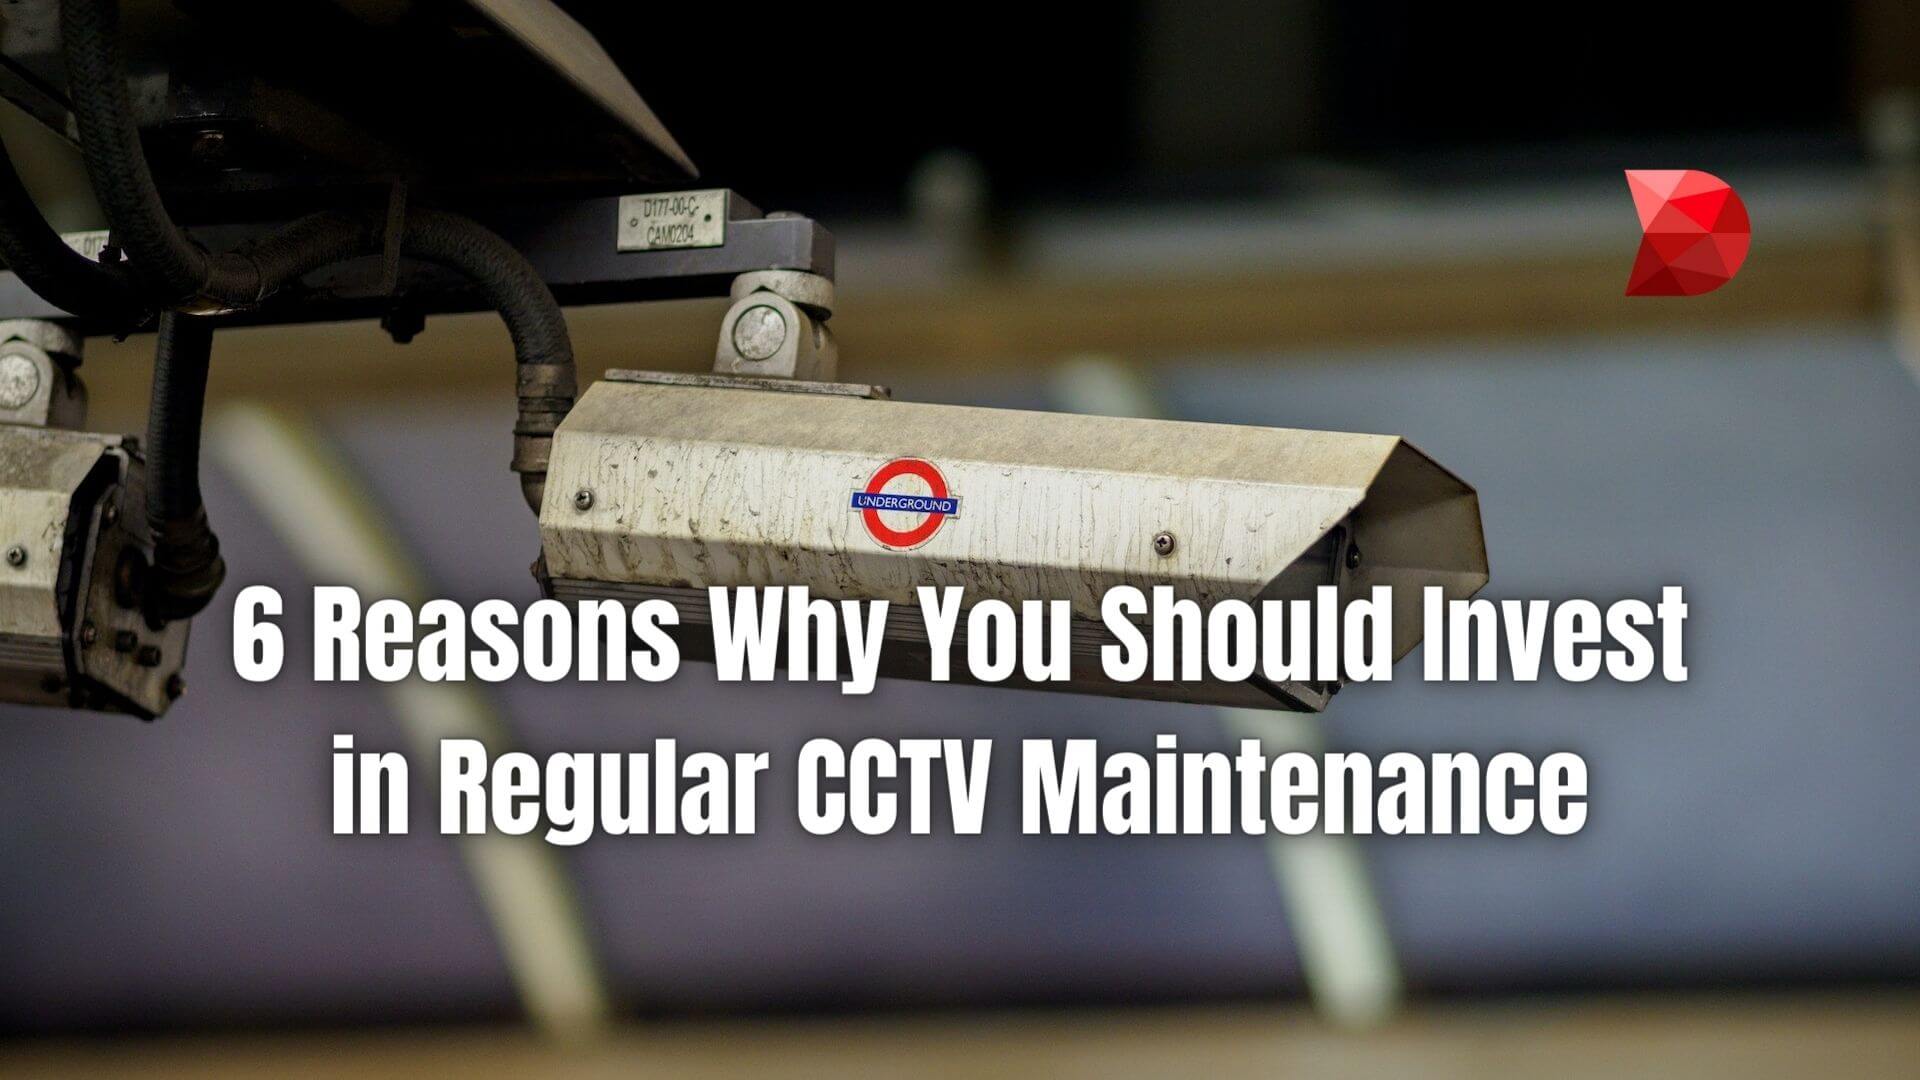 We will discuss the importance of CCTV maintenance and why you should consider using a CCTV maintenance checklist. Read here to learn more!